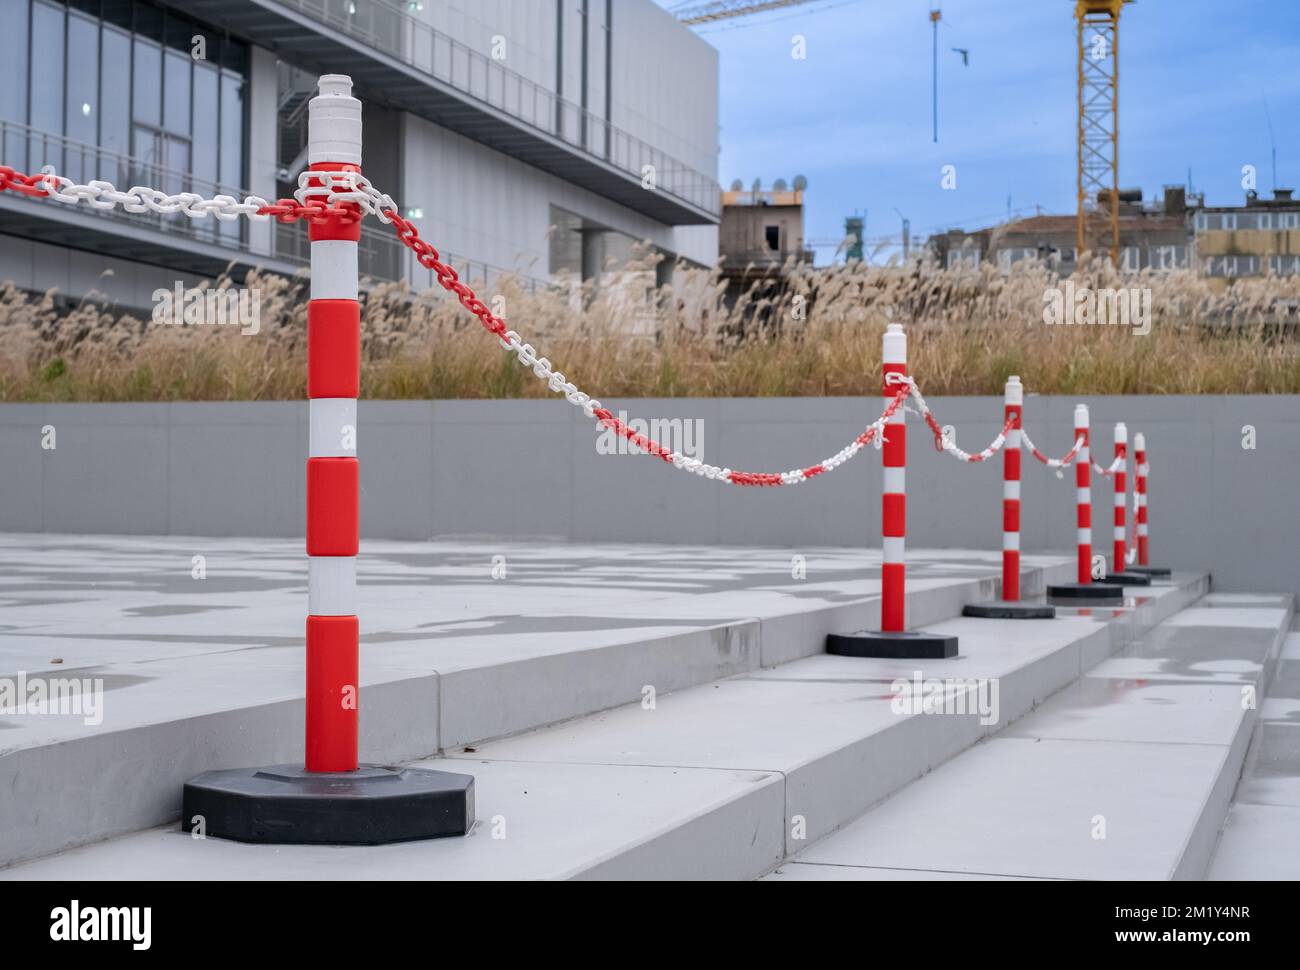 Side view of orange plastic street cones and poles with reflective silver tape near chain link fence at the entrance of a building. Stock Photo